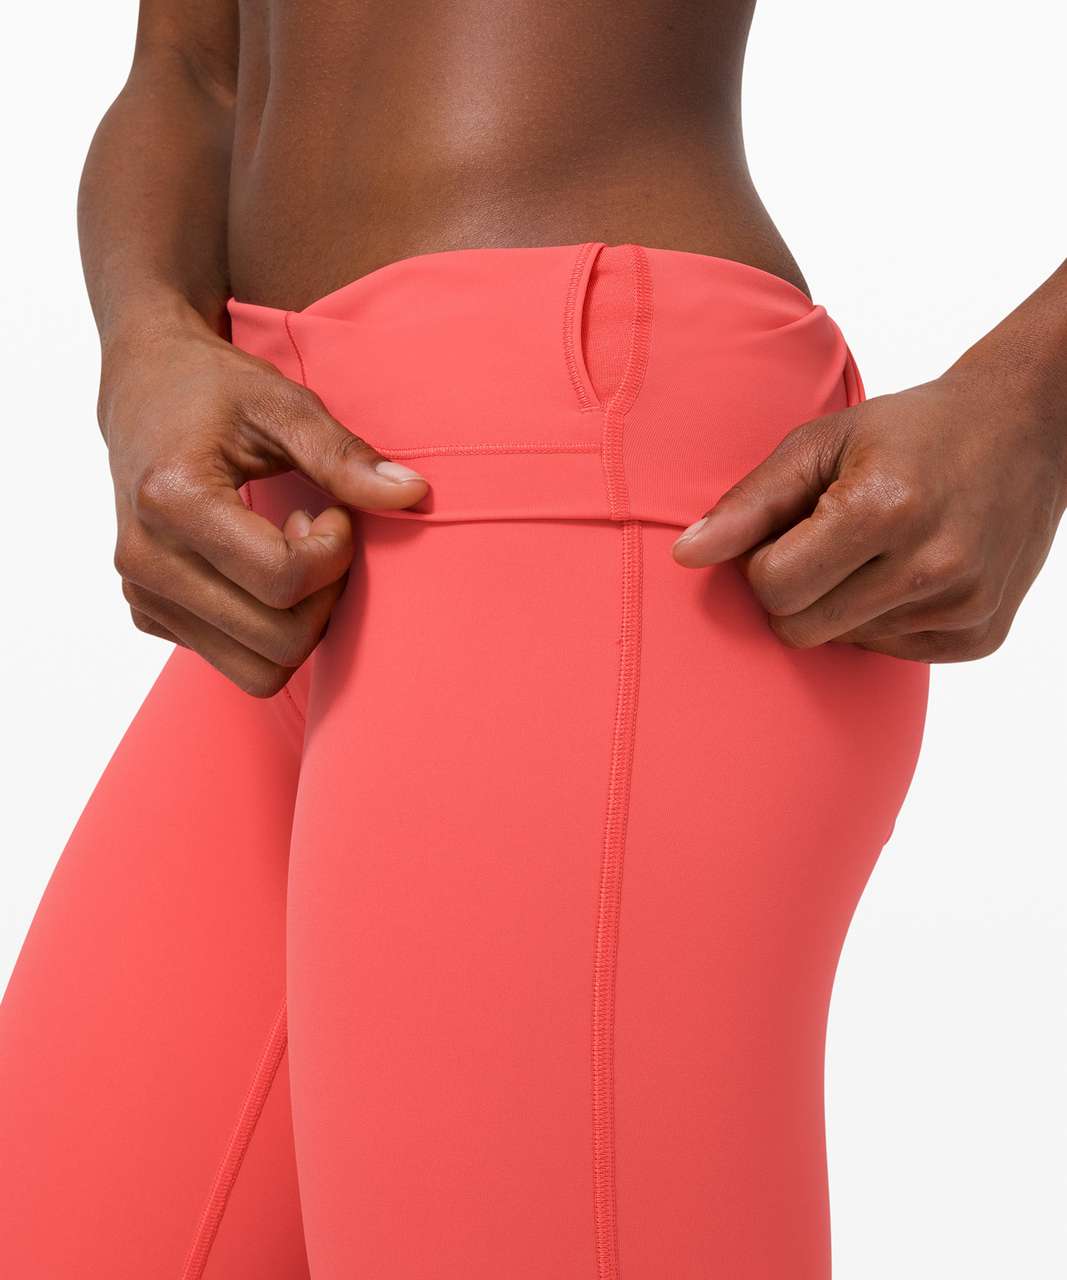 Lululemon Wunder Under High-Rise 7/8 Tight *Luxtreme 25" - Watermelon Red